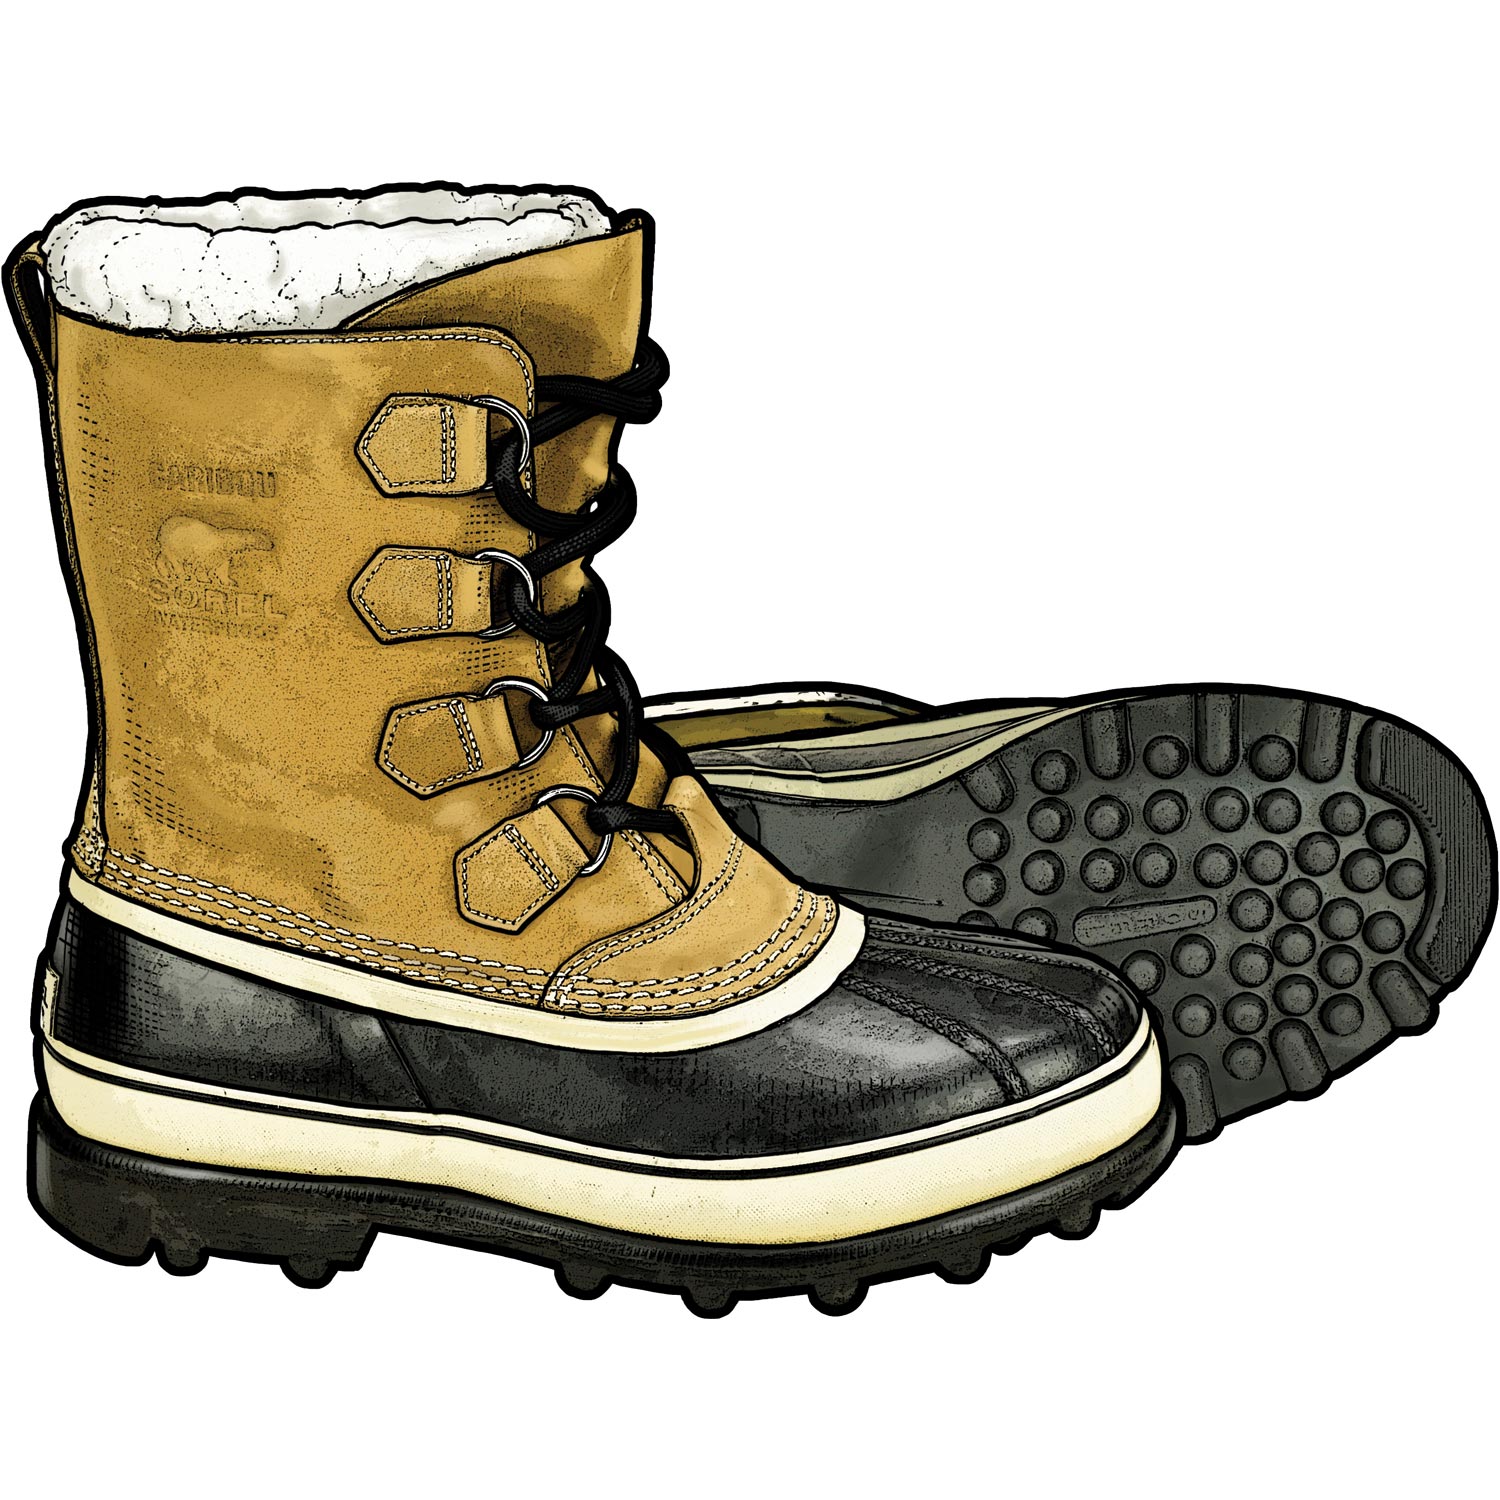 Boot clipart snow boot. Sorel caribou winter boots